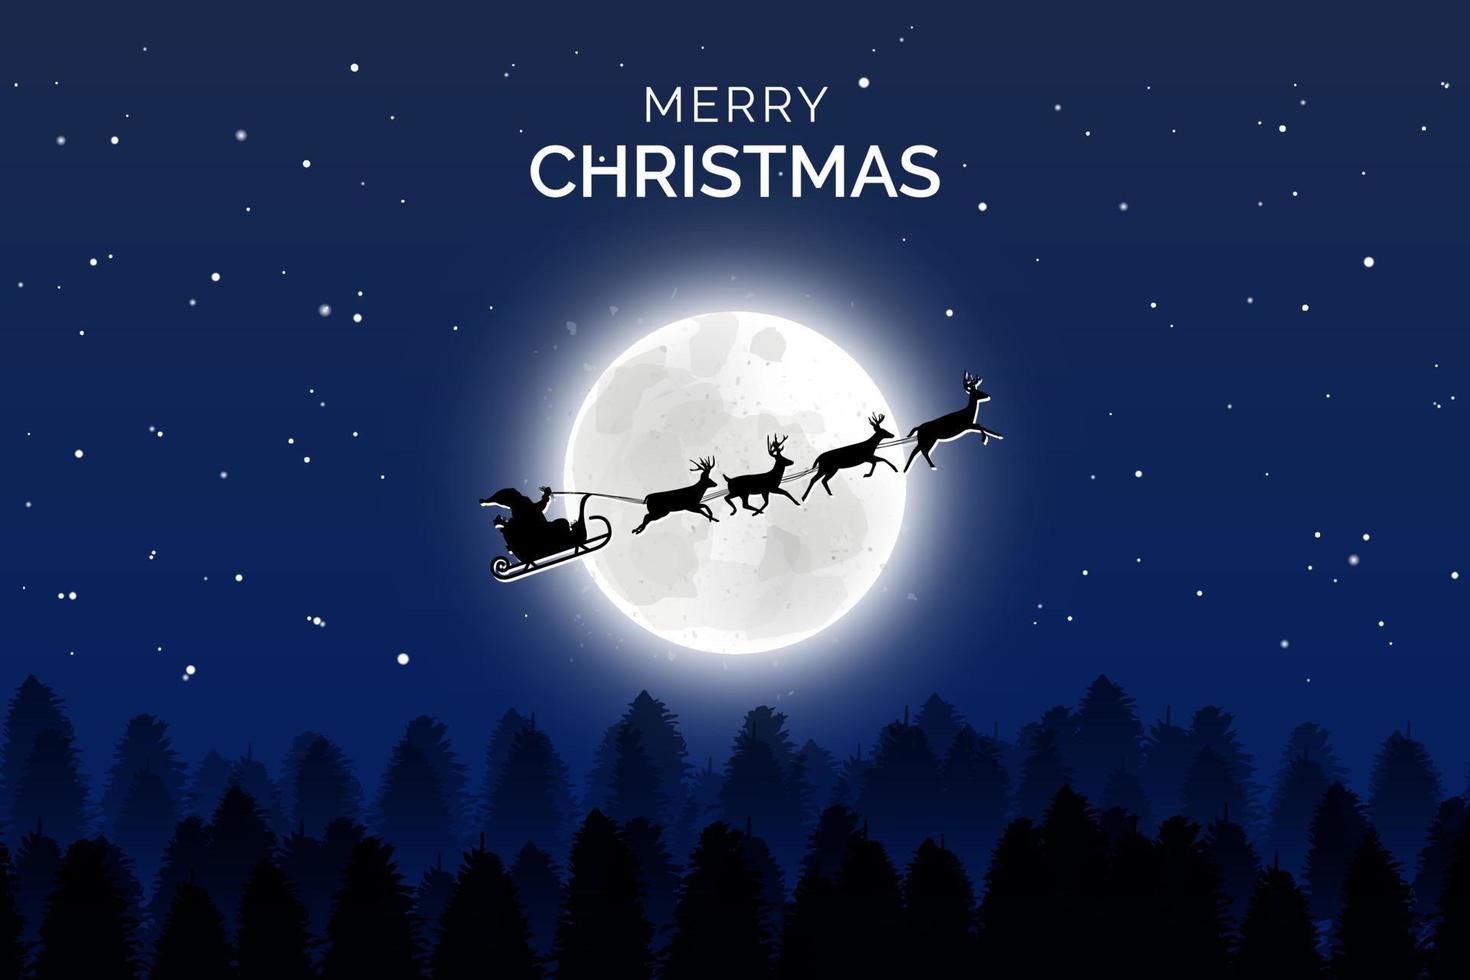 merry christmas background with ligntning moon and flying santa claus and deers on the sky vector